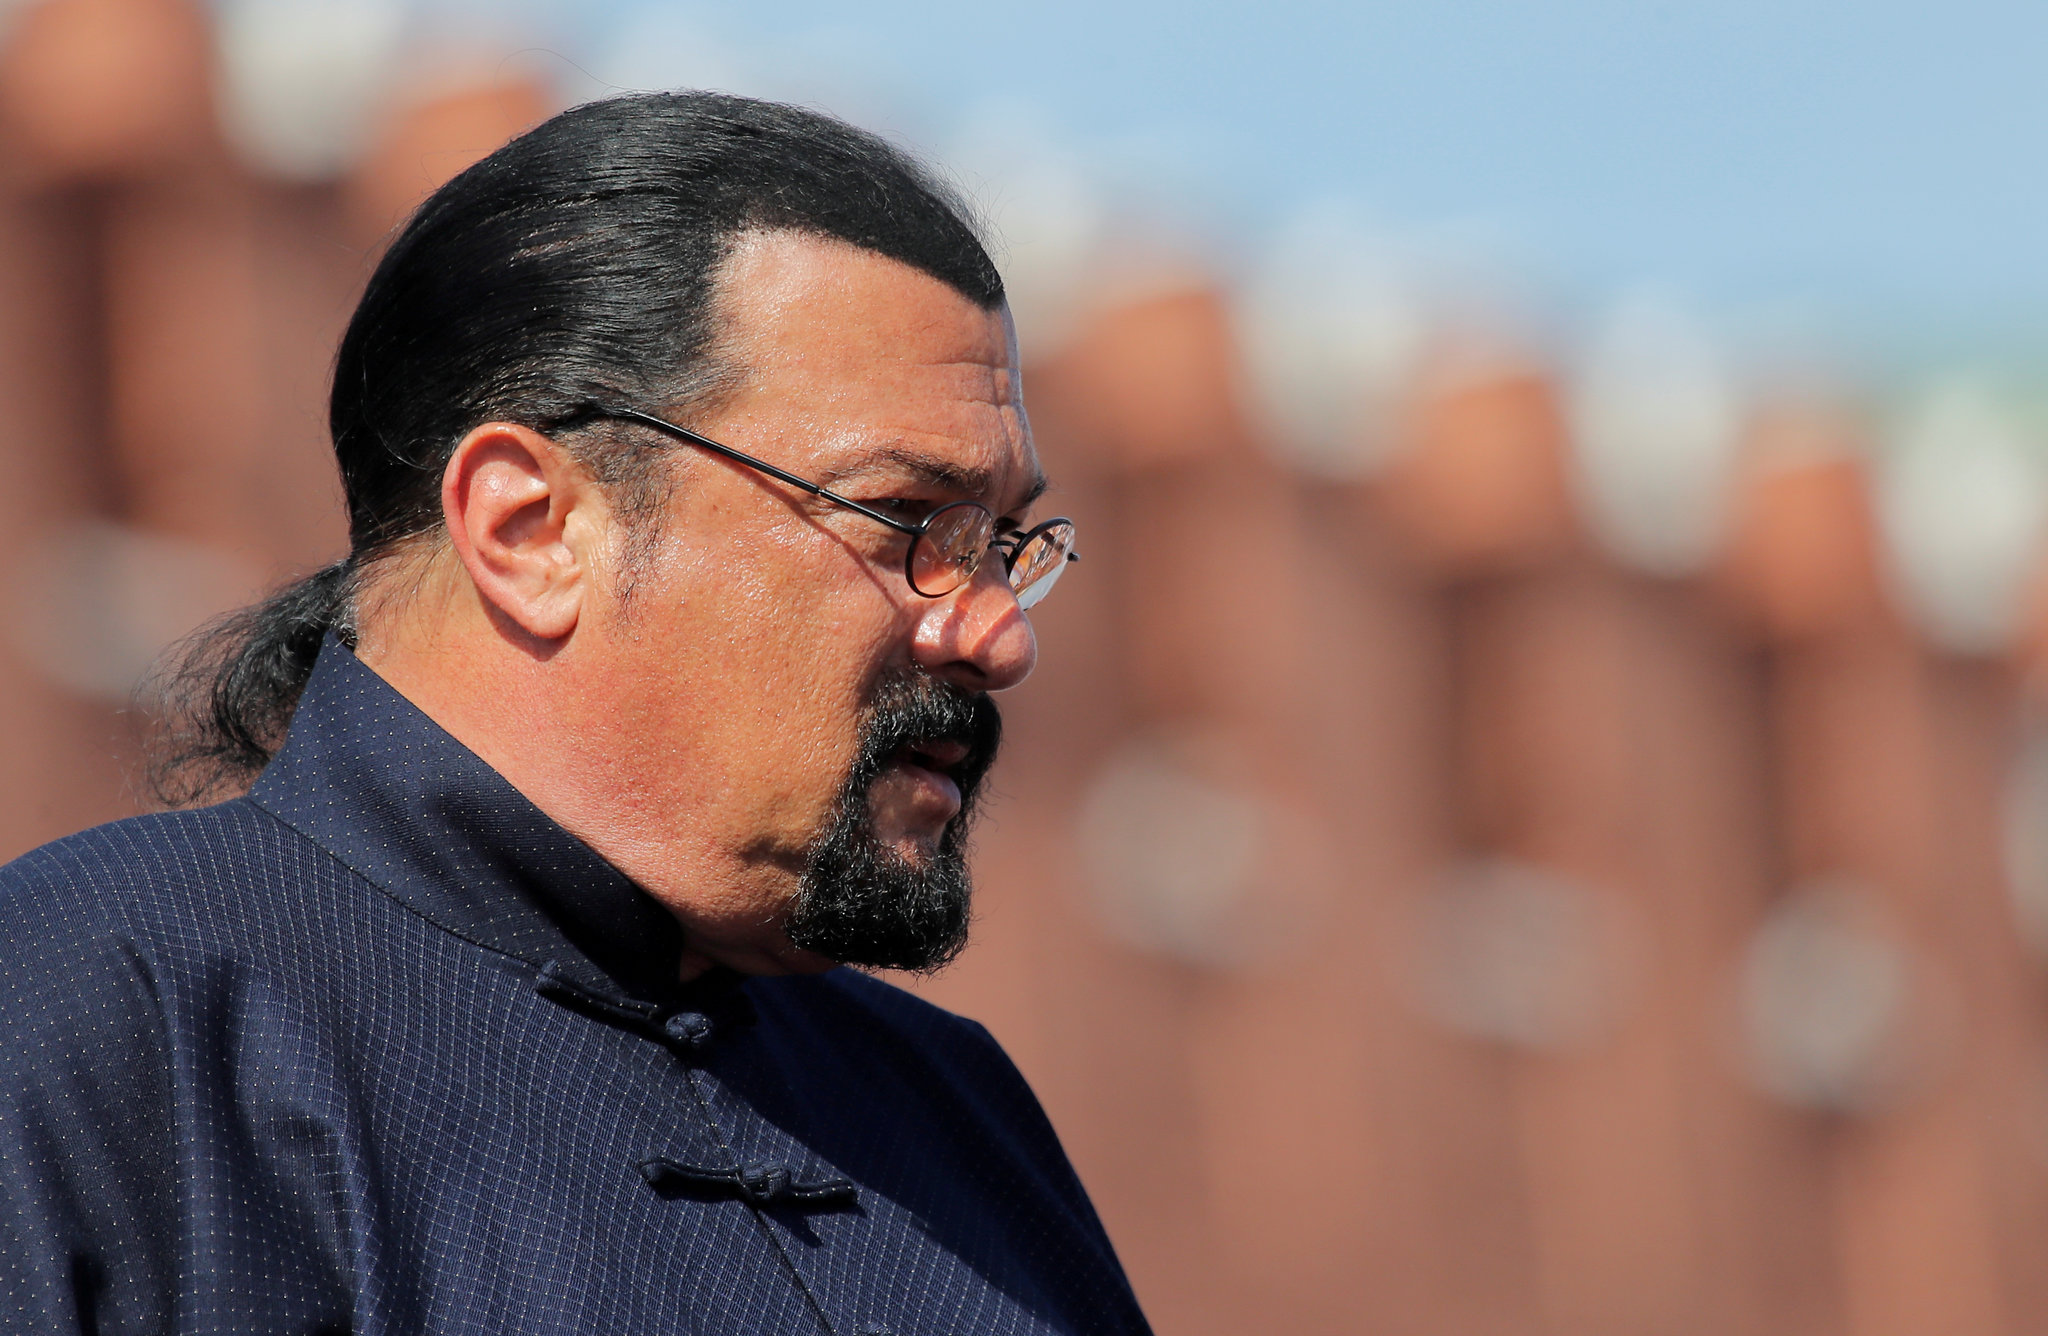 Steven Seagal Wiki, Bio, Age, Net Worth, and Other Facts